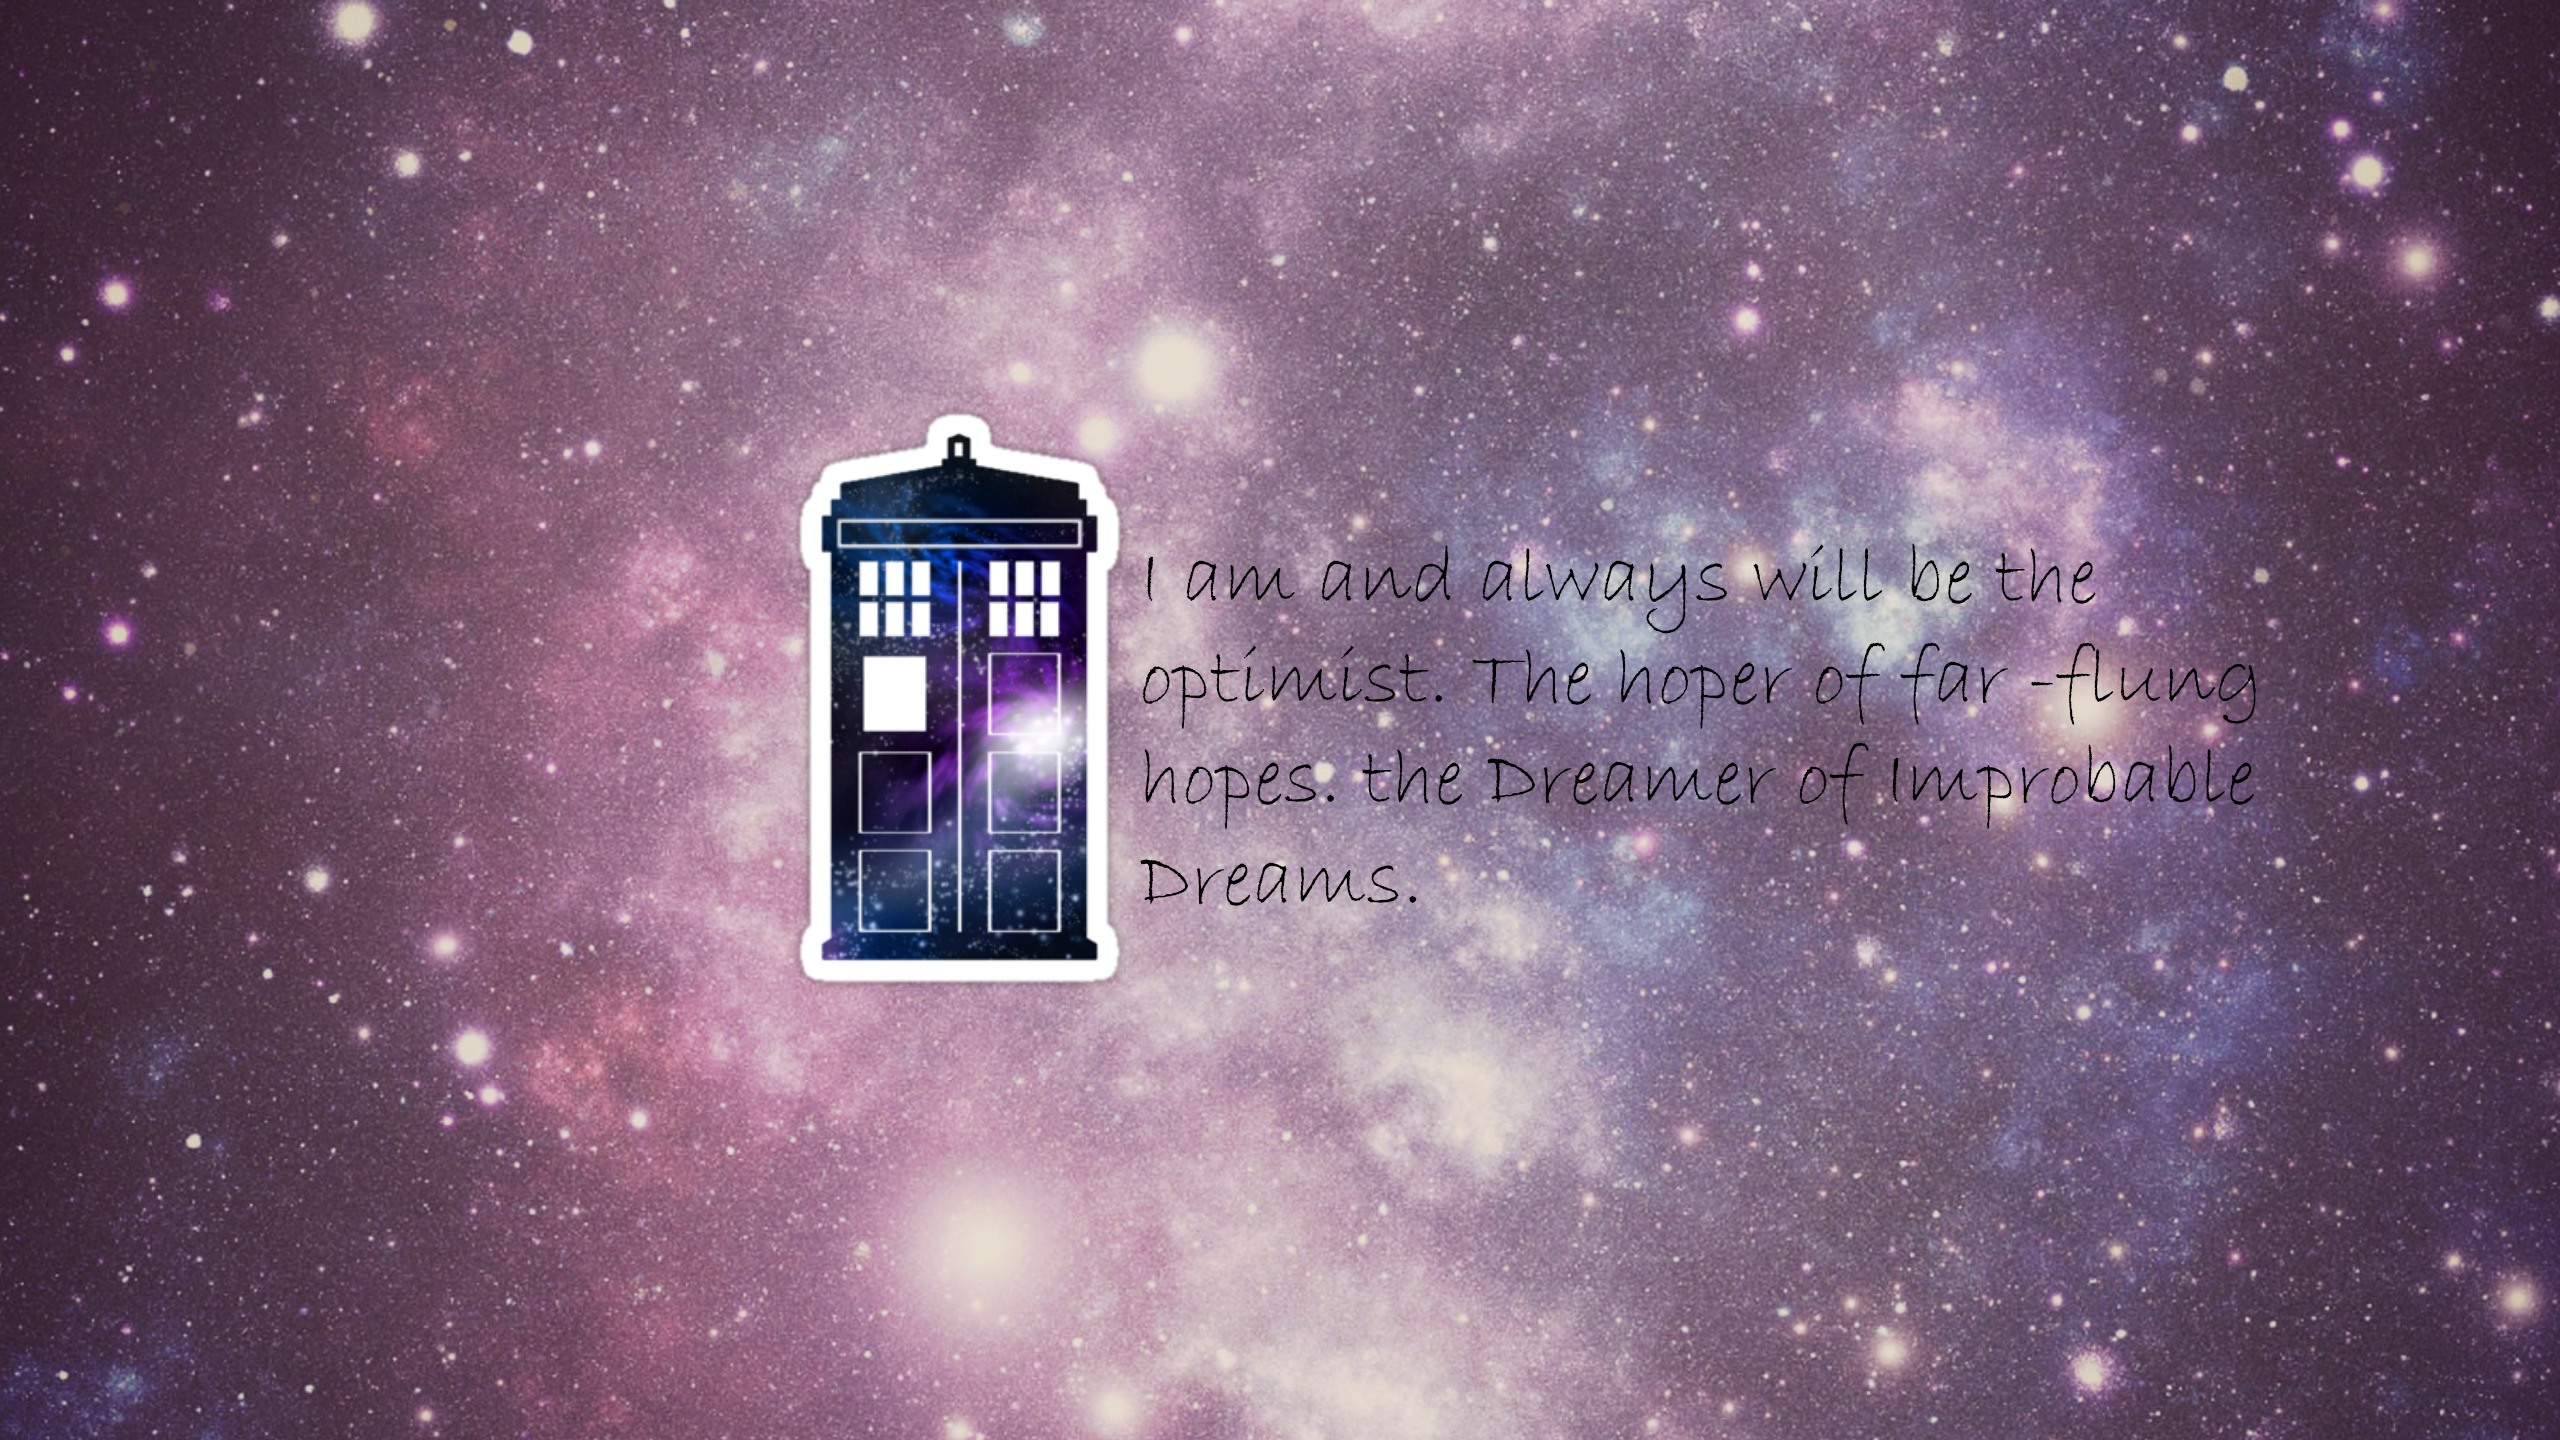 A Wallpaper I Made Doctor Who Desktop And Mobile